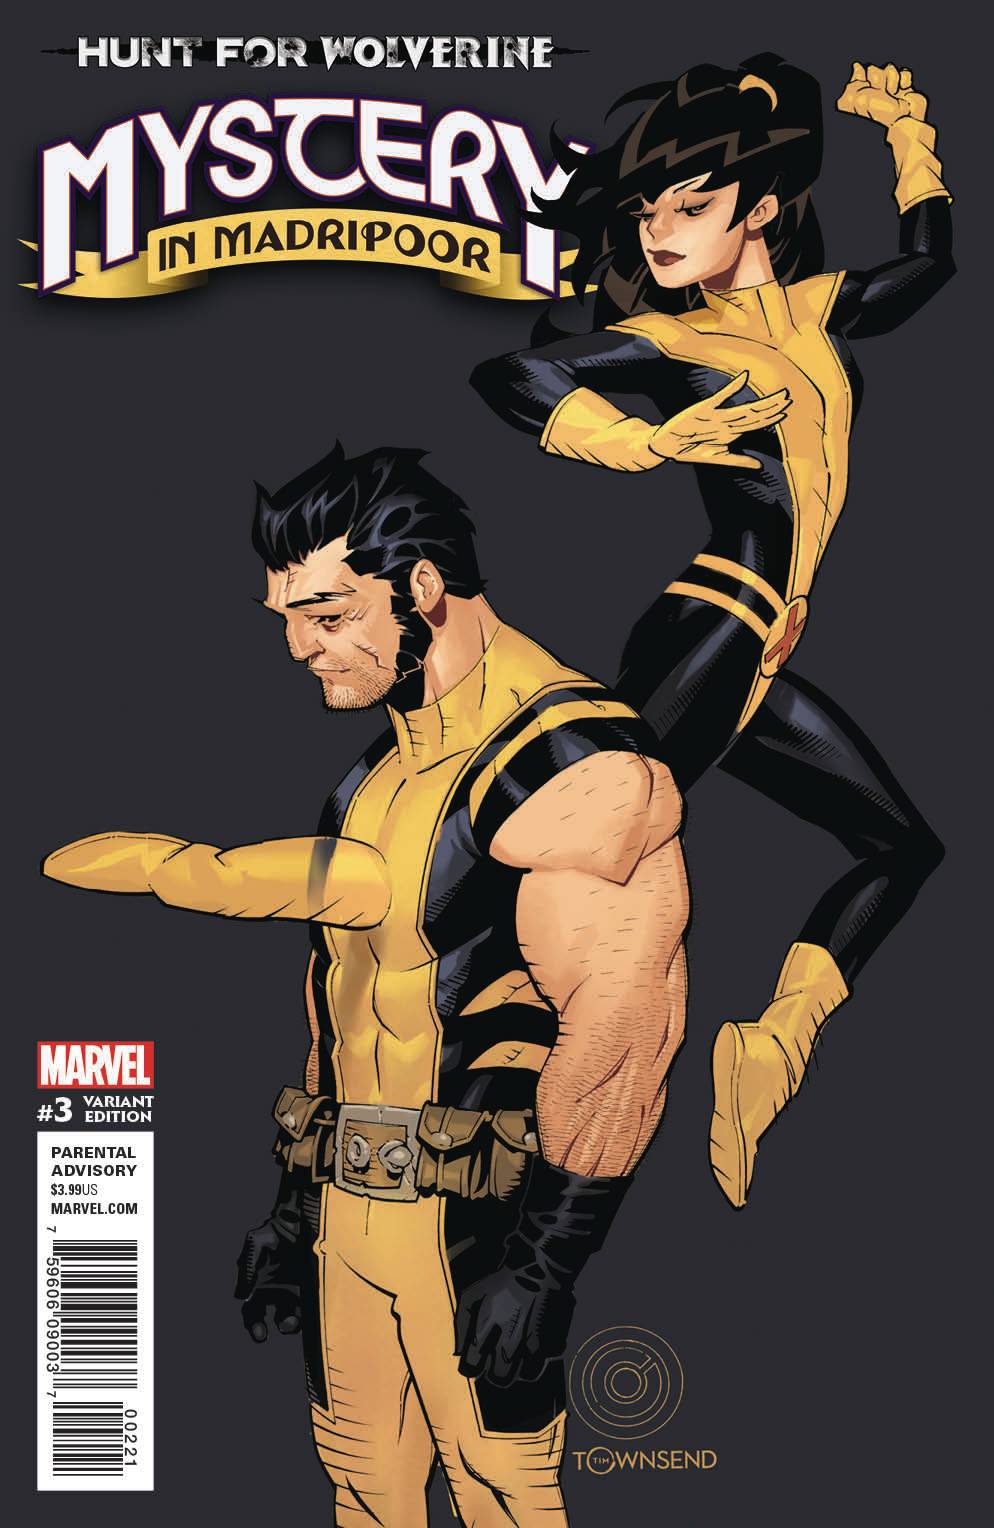 HUNT FOR WOLVERINE MYSTERY MADRIPOOR #3 (OF 4) BACHALO VAR (07/25/2018)